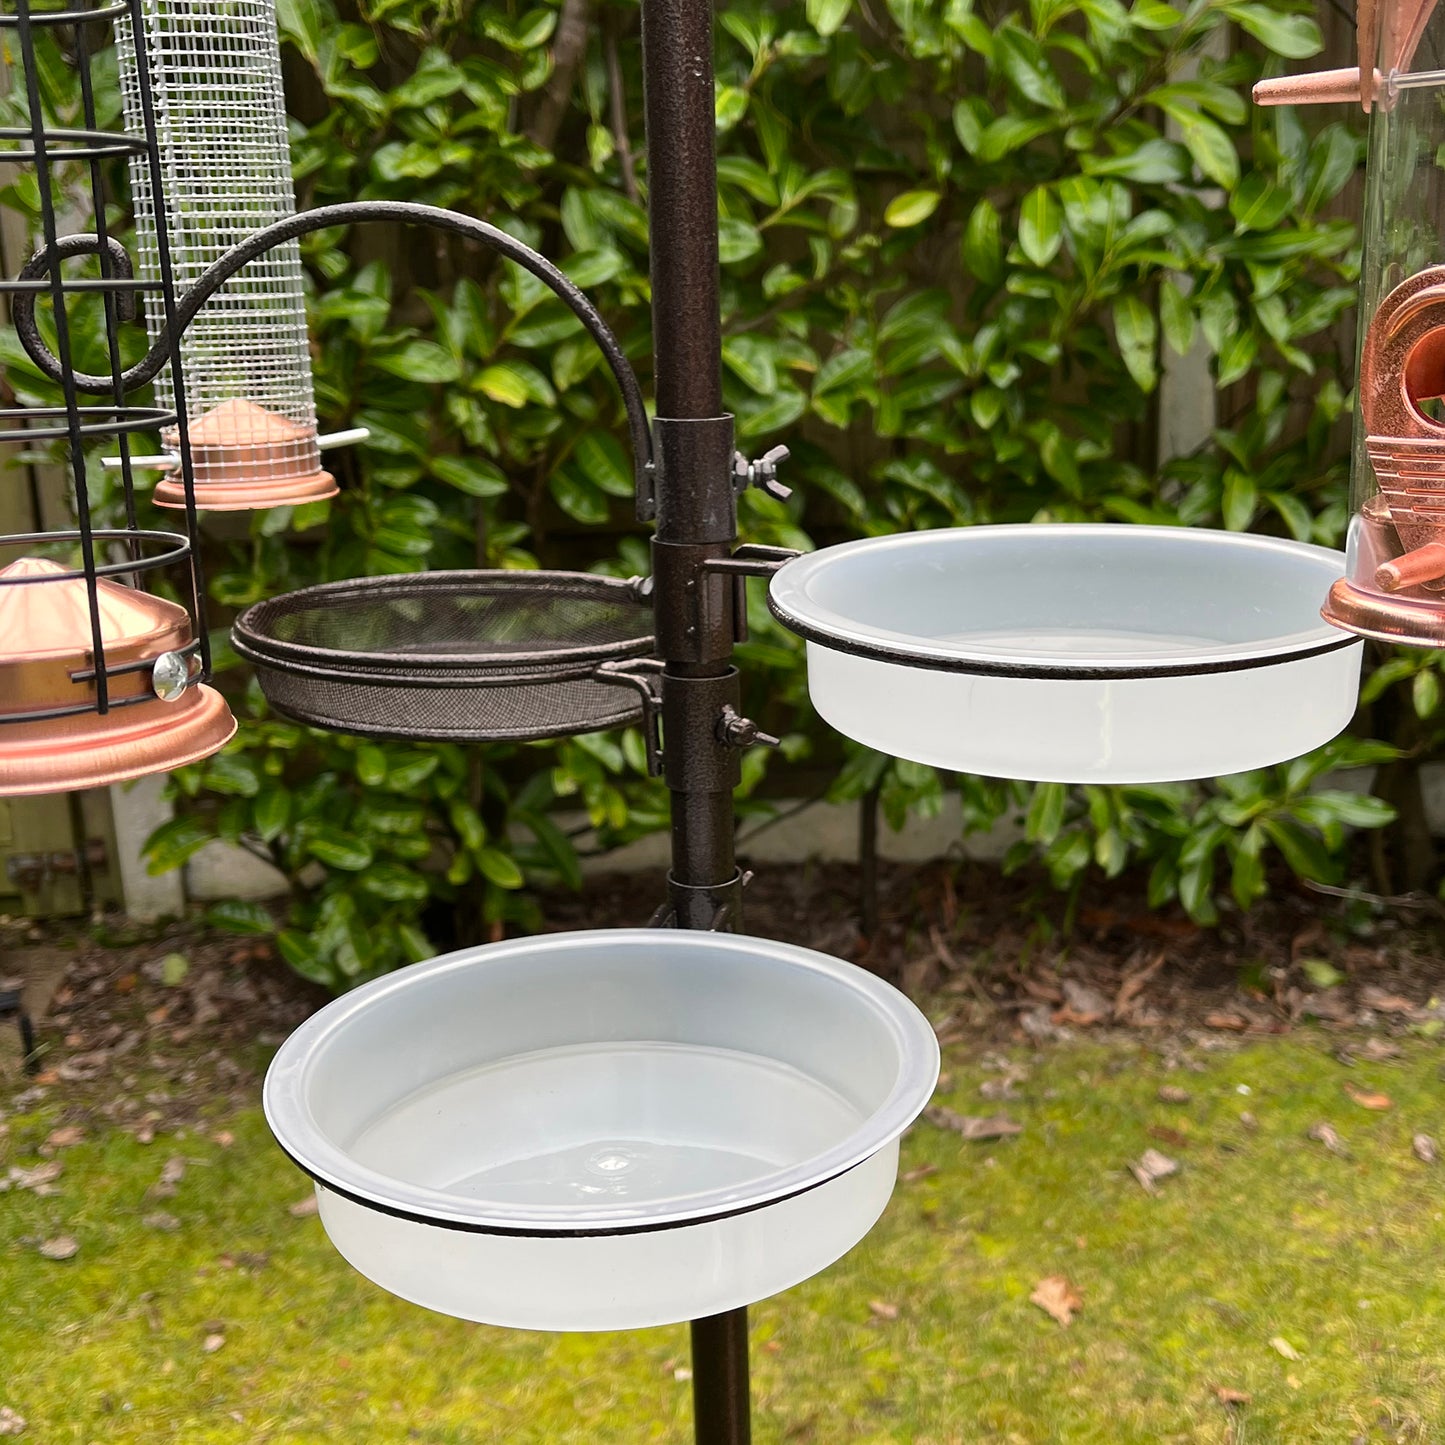 Deluxe Complete Metal Bird Feeding Station with Large Copper Style Feeders